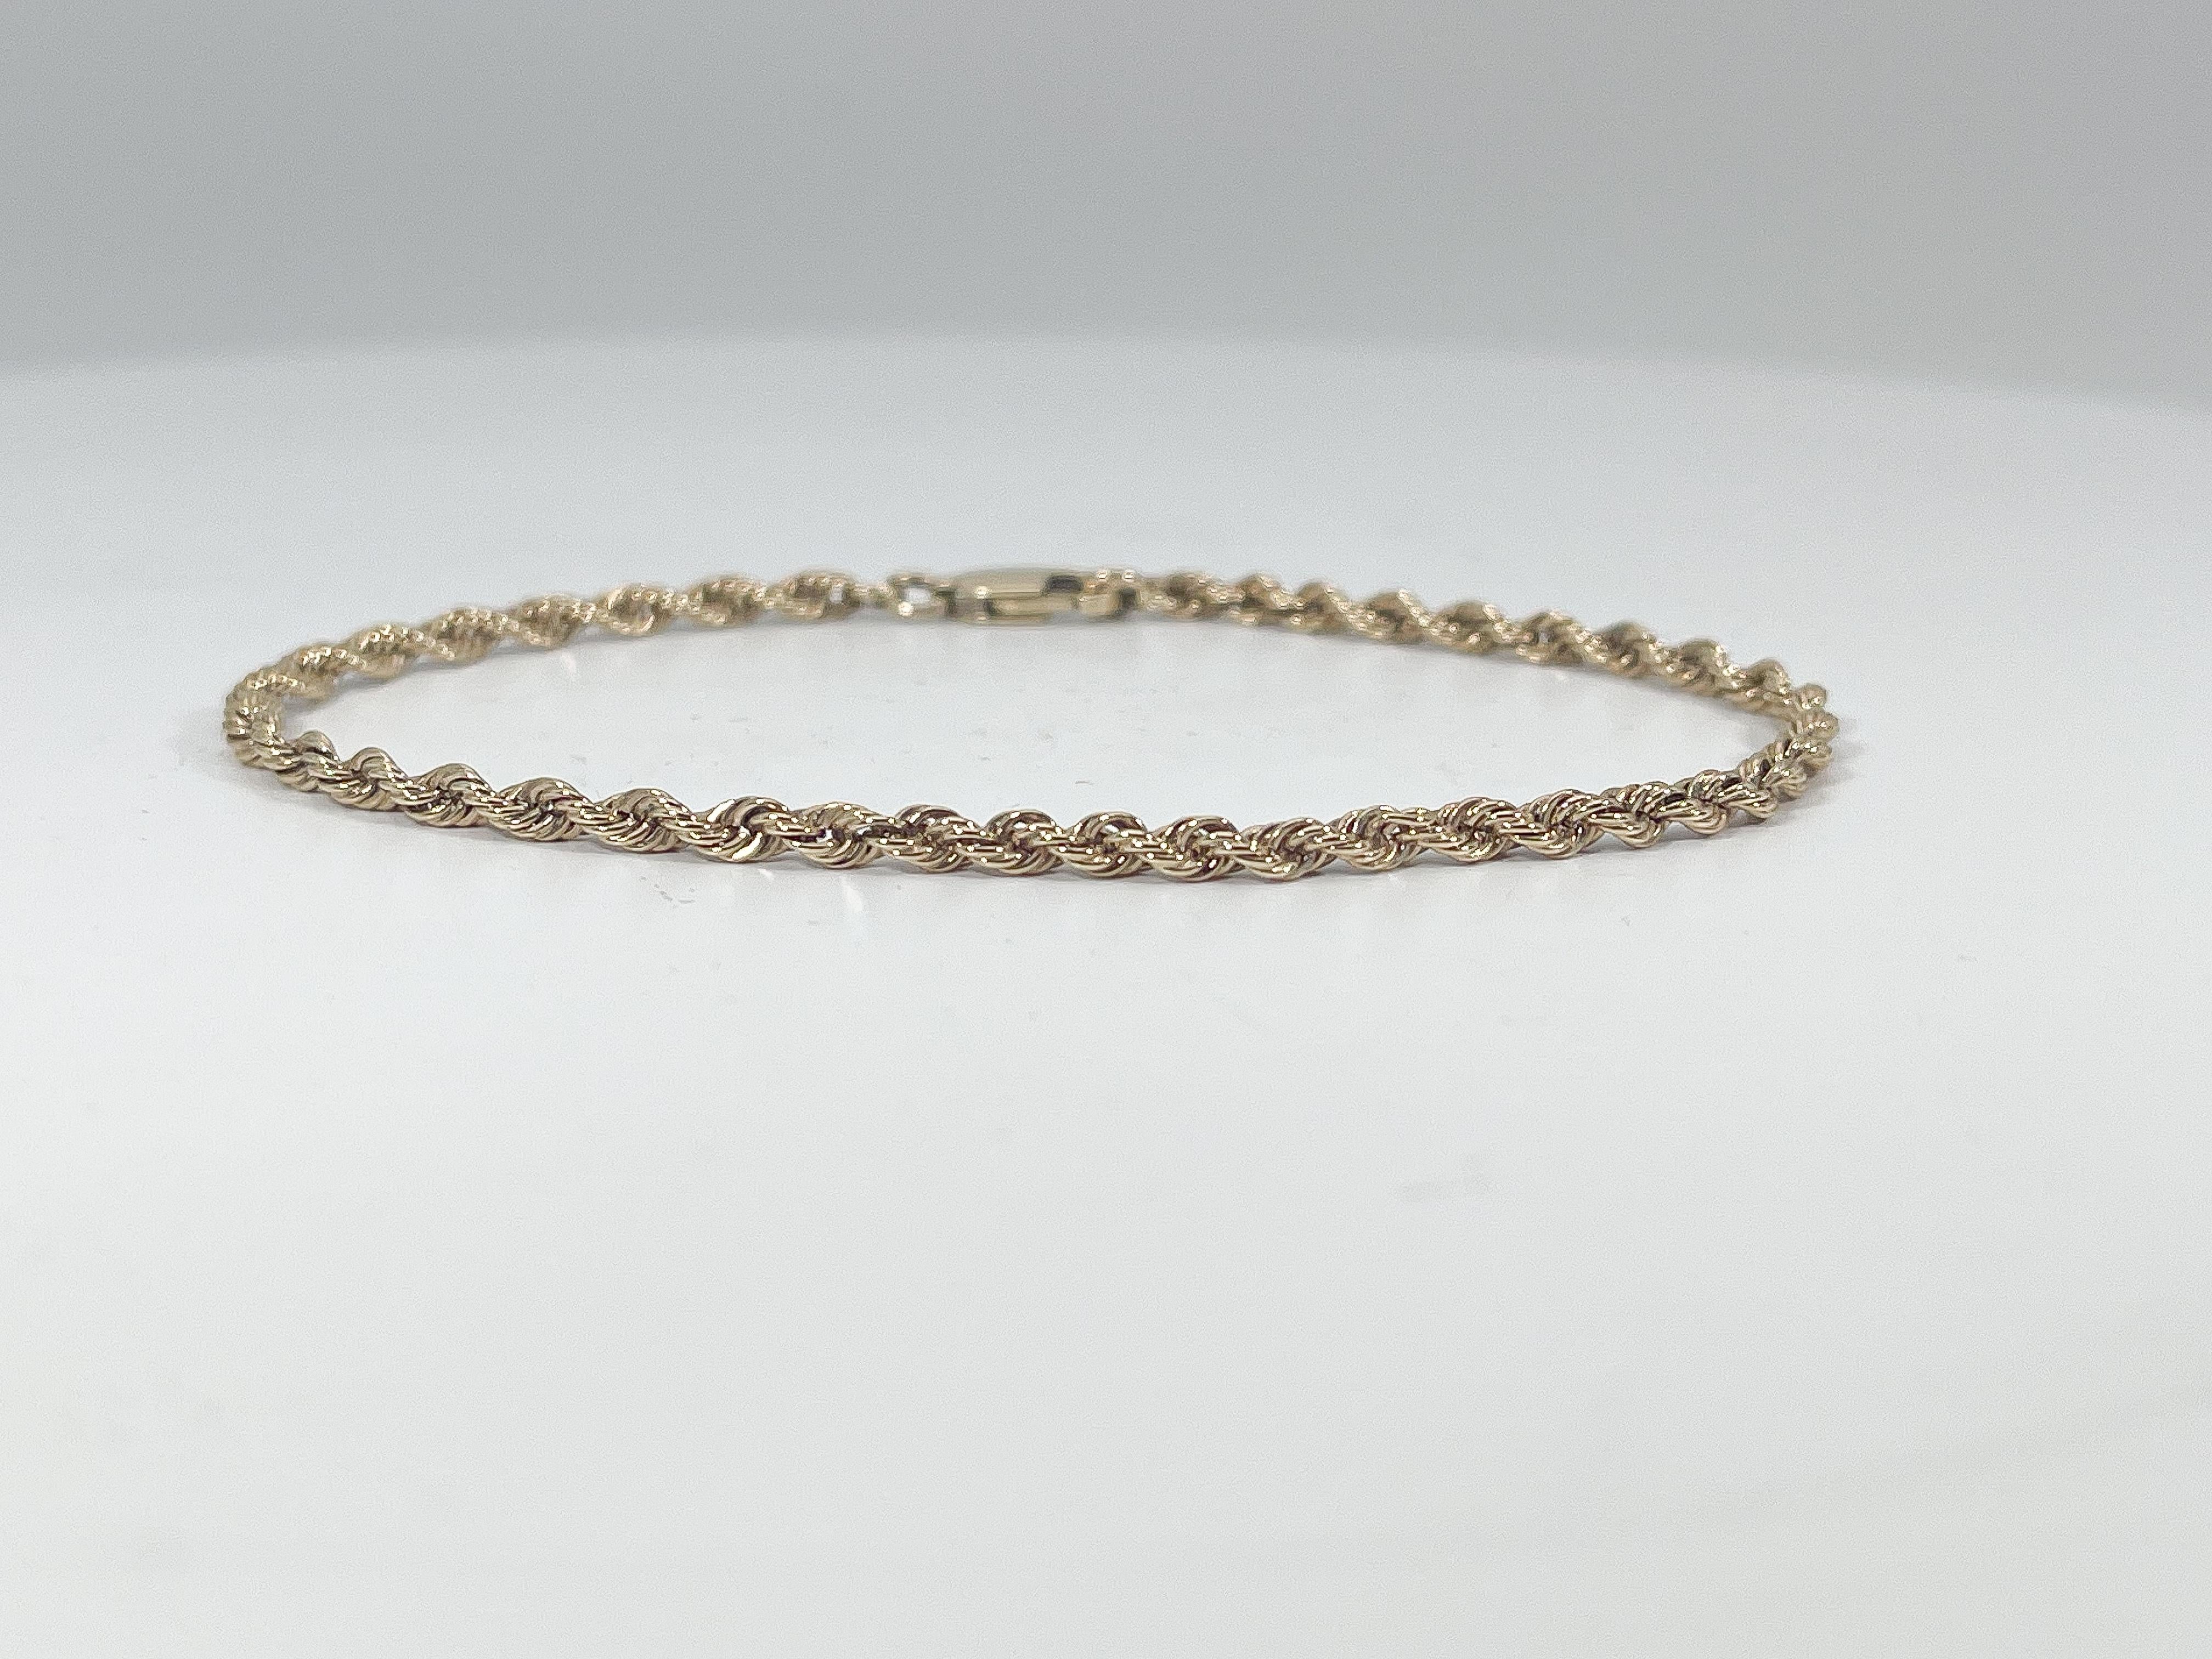 14k yellow gold rope bracelet. Has a lobster clasp, width of 2.5 mm, a length of 7.5 inches, and has a total weight of 4.84 grams.